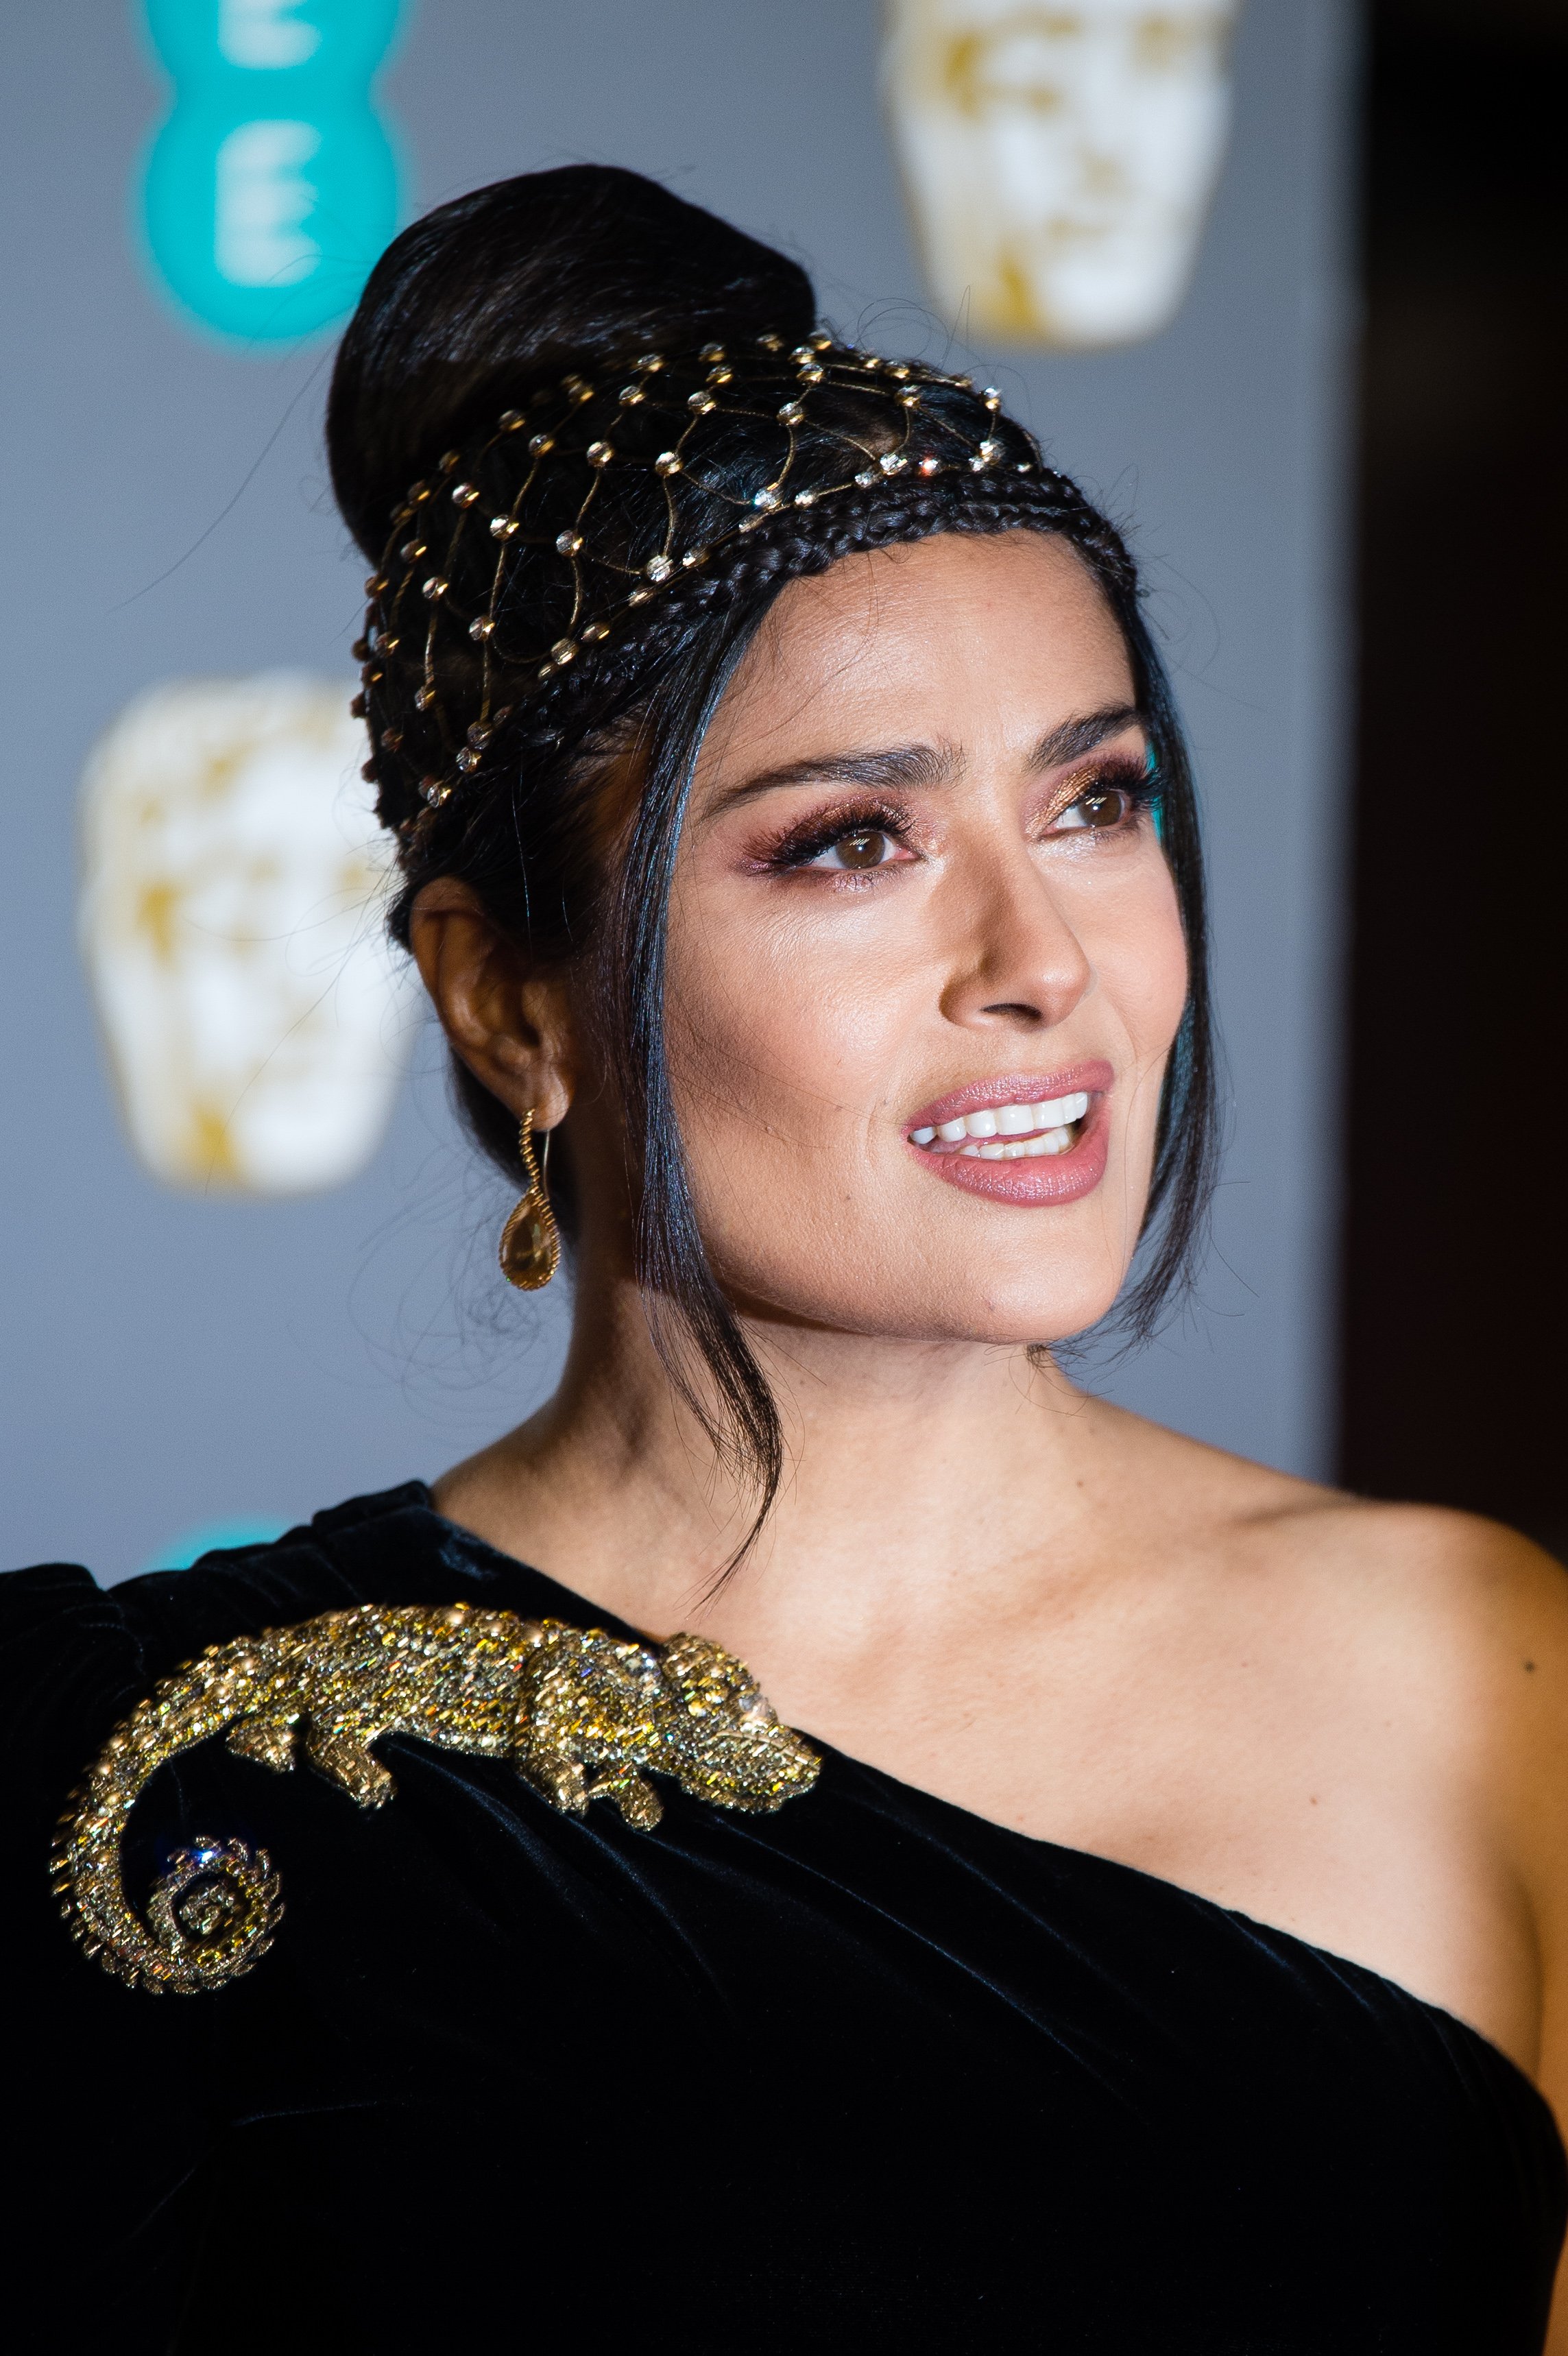 Salma Hayek attends the EE British Academy Film Awards in London, England on February 10, 2019 | Photo: Getty Images